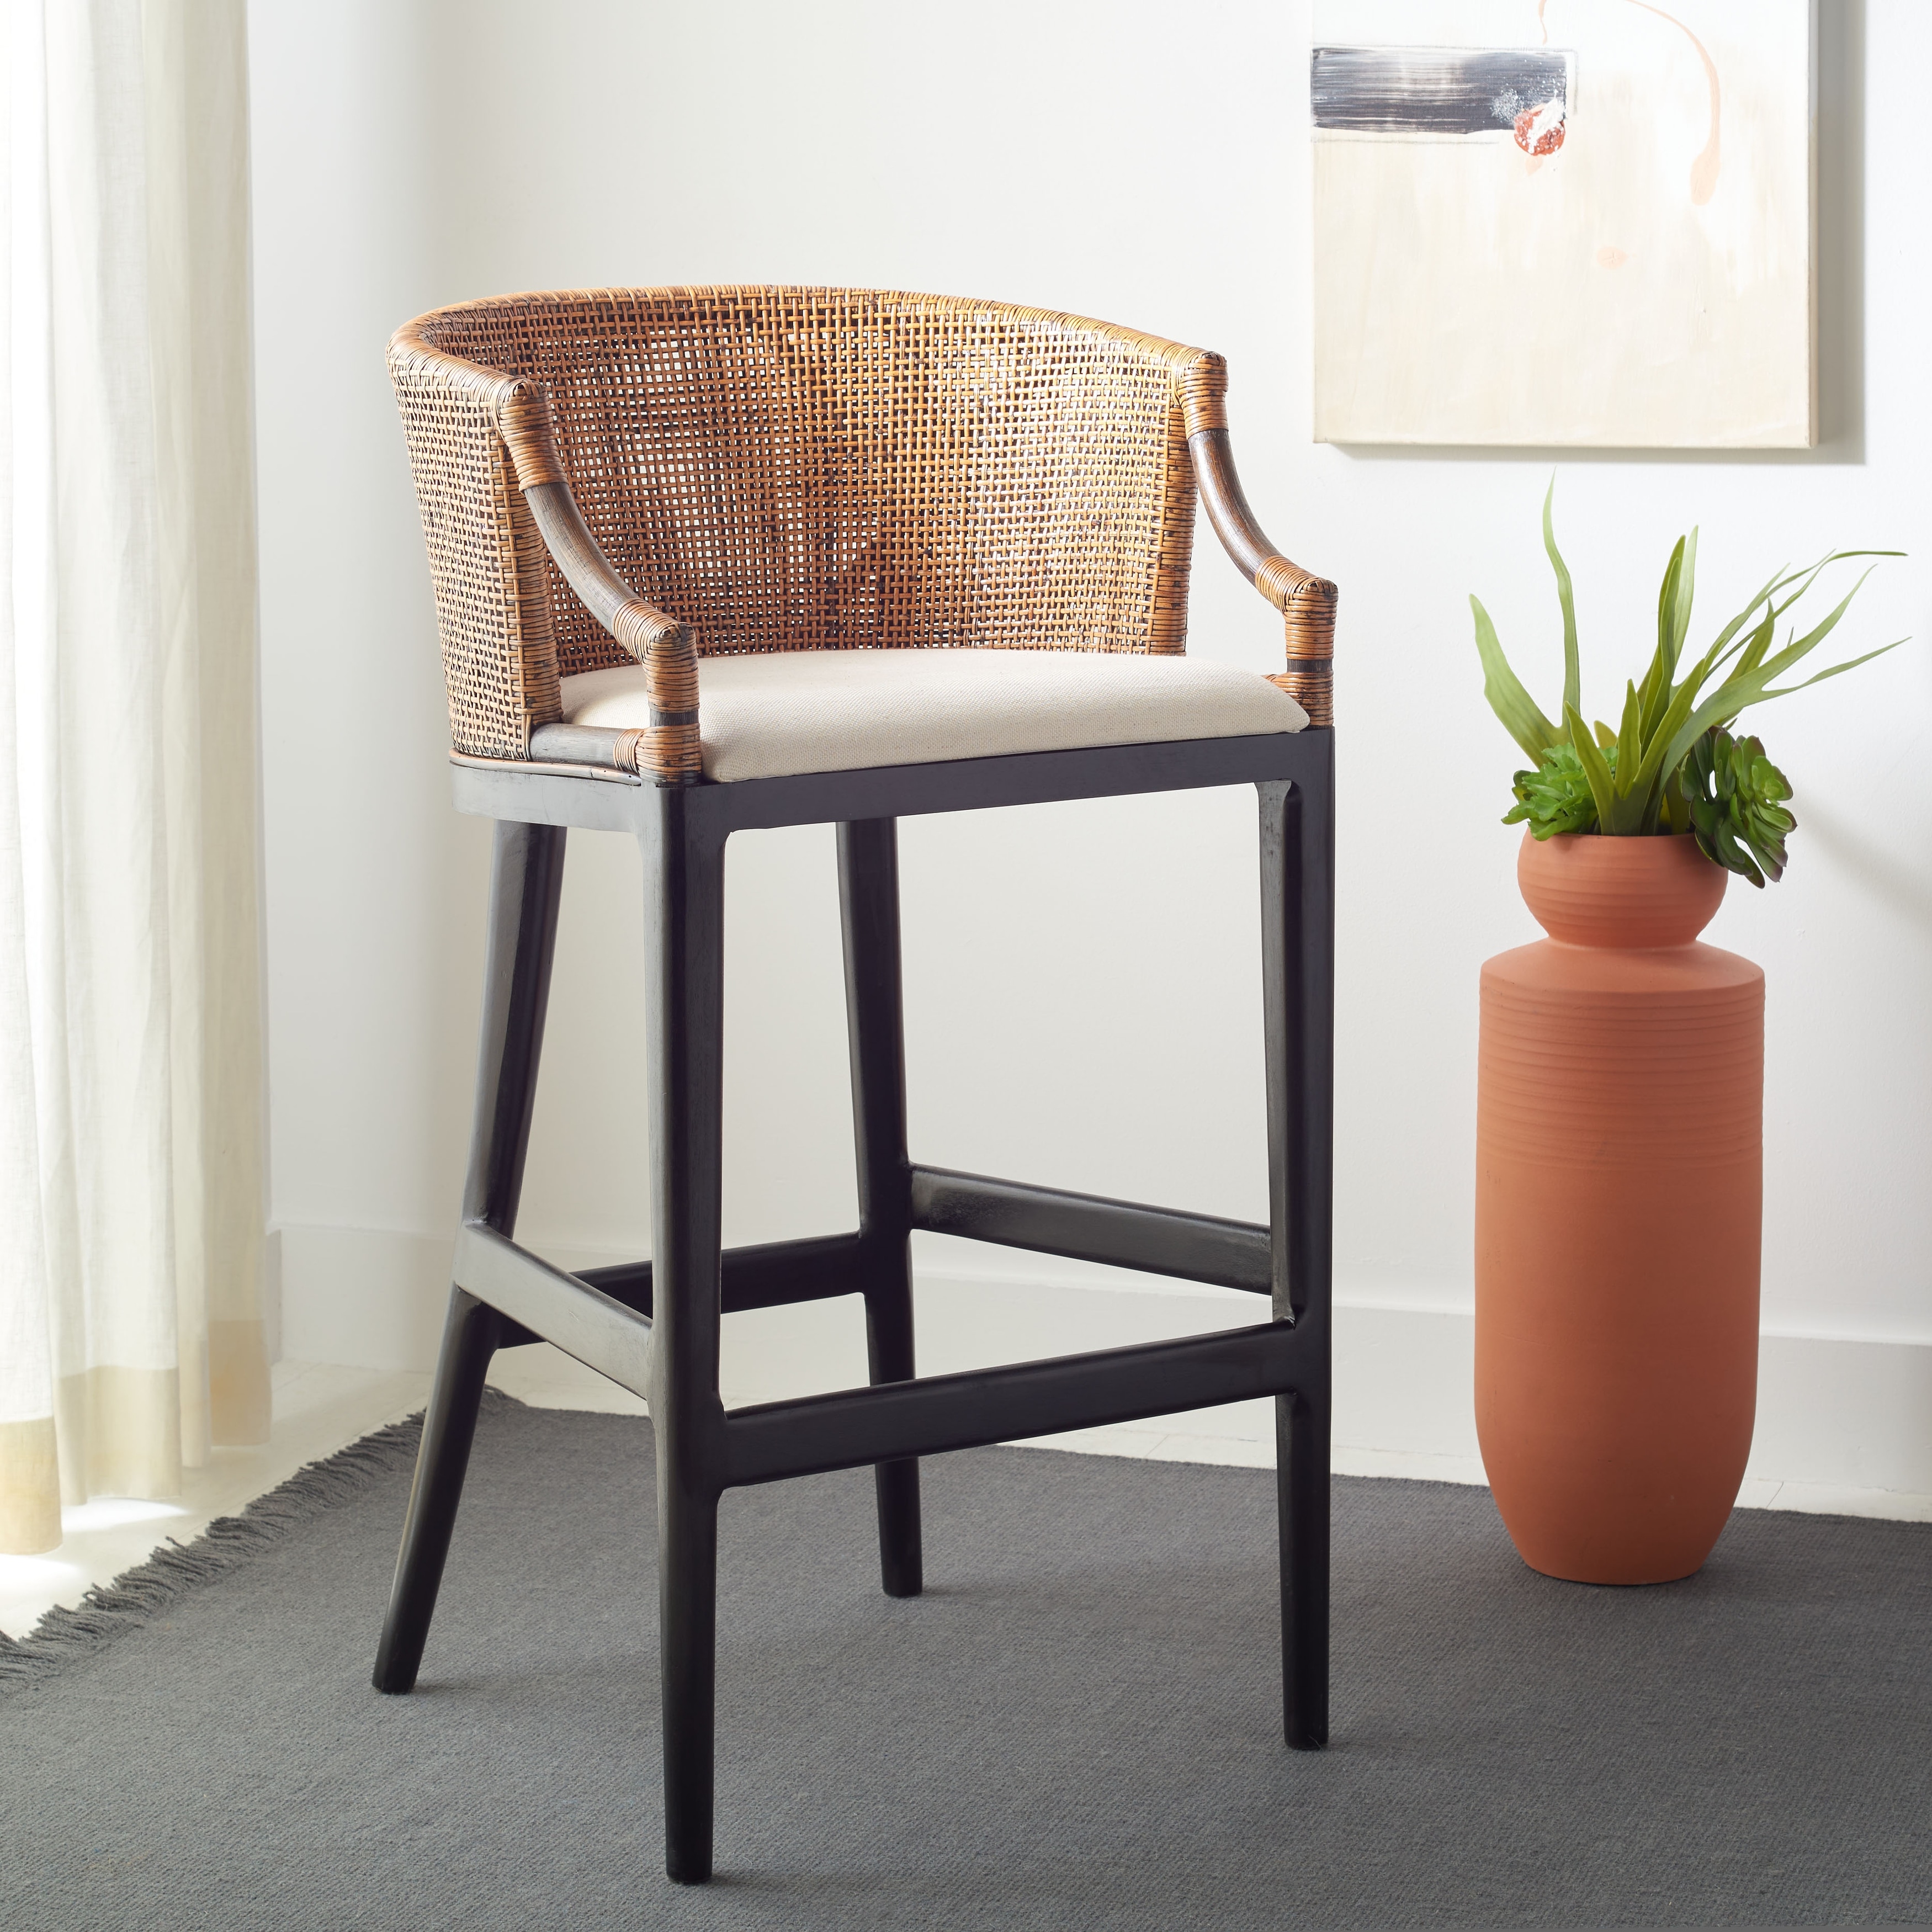 BIRDROCK HOME Bird Rock Seagrass Counter Stool (Counter Height) Hand Woven  Mahogany Wood Frame Fully Assembled